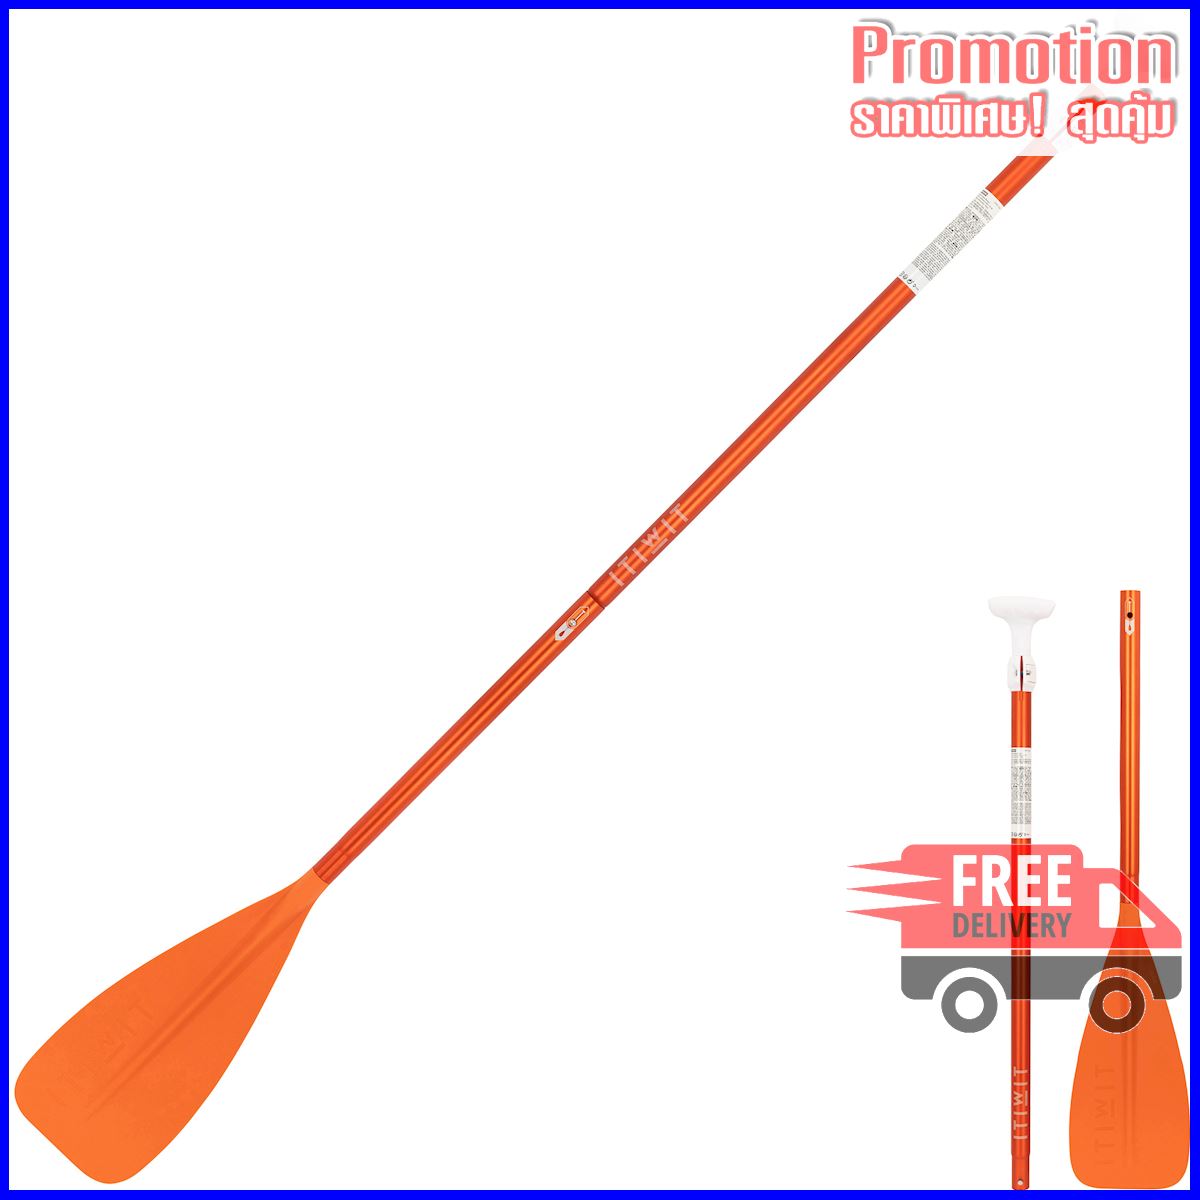 3-PART STAND UP PADDLE 100 COLLAPSIBLE ADJUSTABLE 170-220 CM - ORANGE